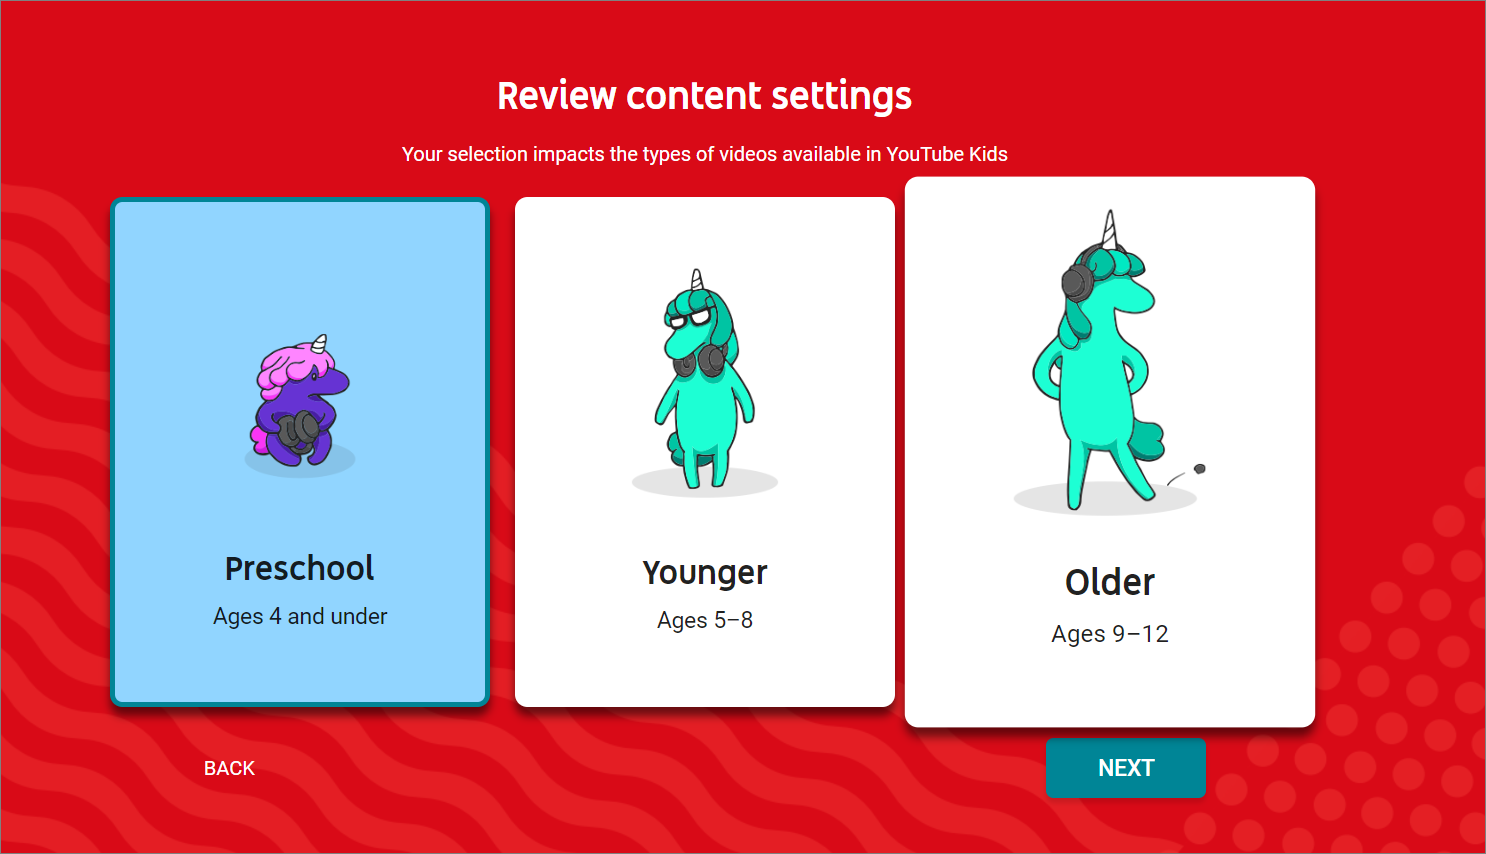 How to Set up and Use YouTube Kids App